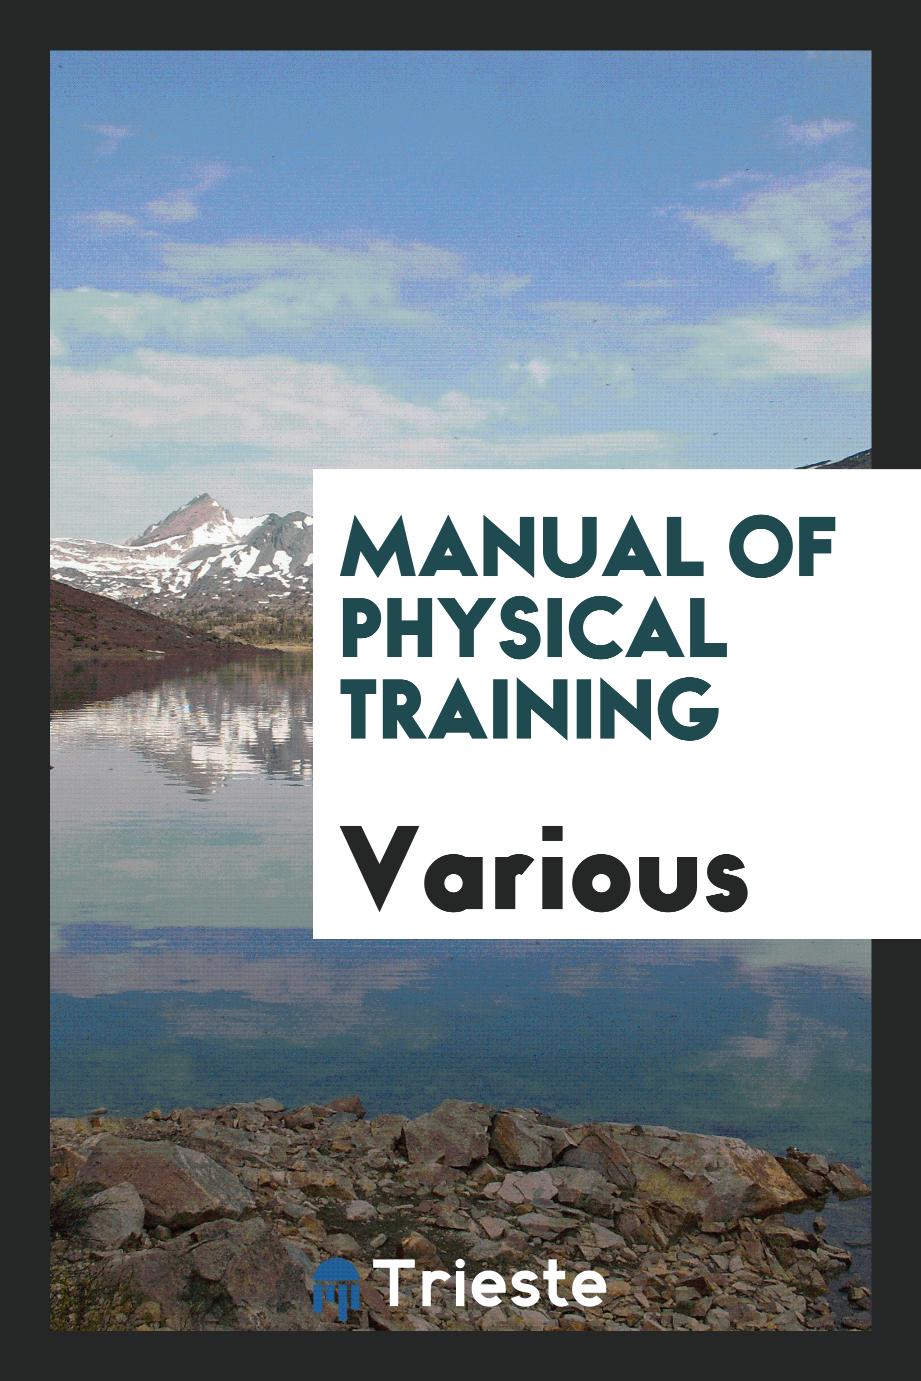 Manual of physical training